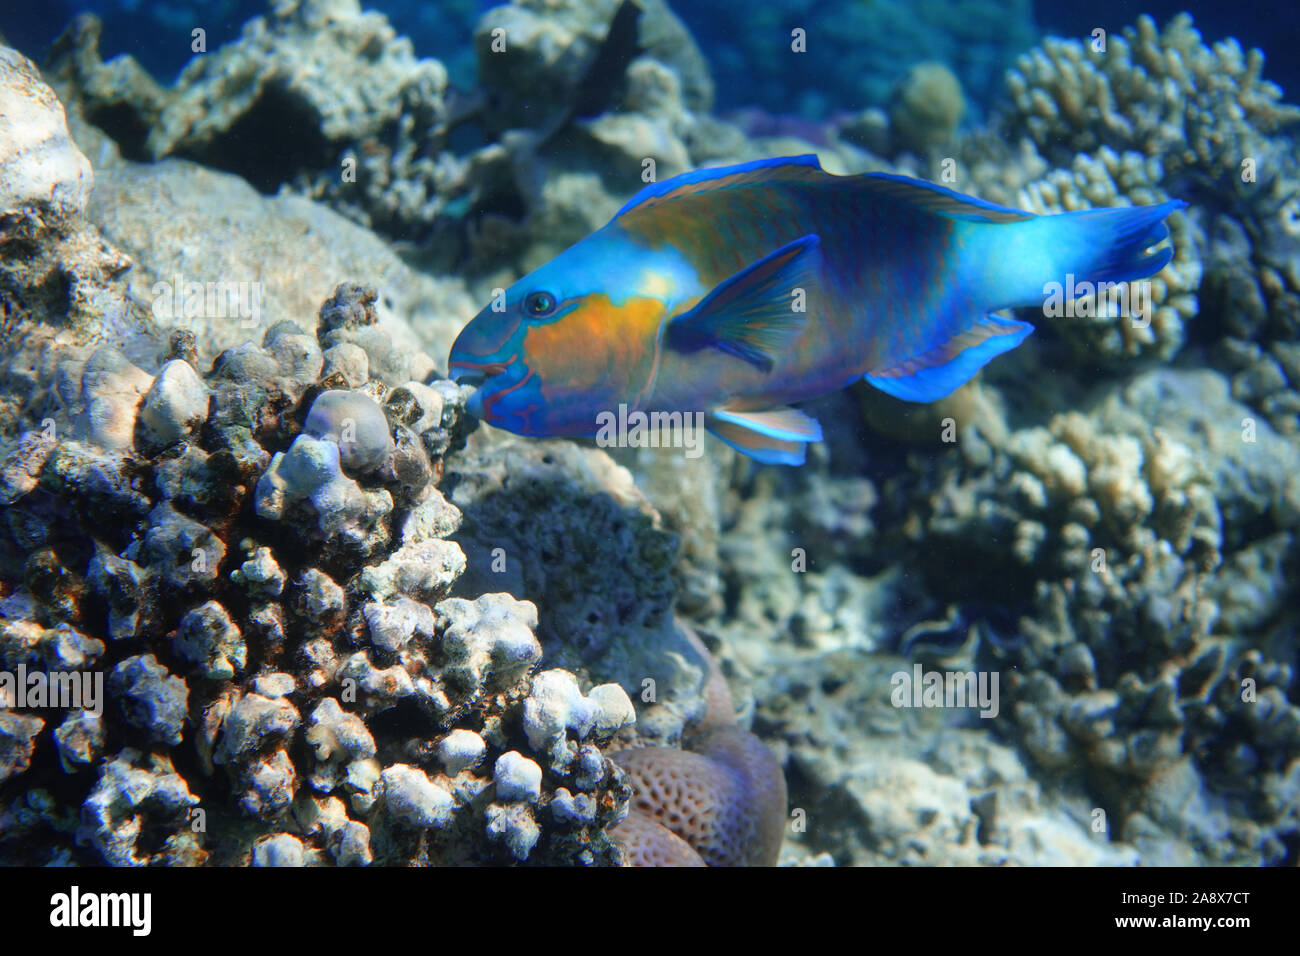 Tropical Fish In The Ocean. Queen Parrotfish With Blue Fins. Colorful Saltwater Fish In The Sea Near Coral Reef. Stock Photo